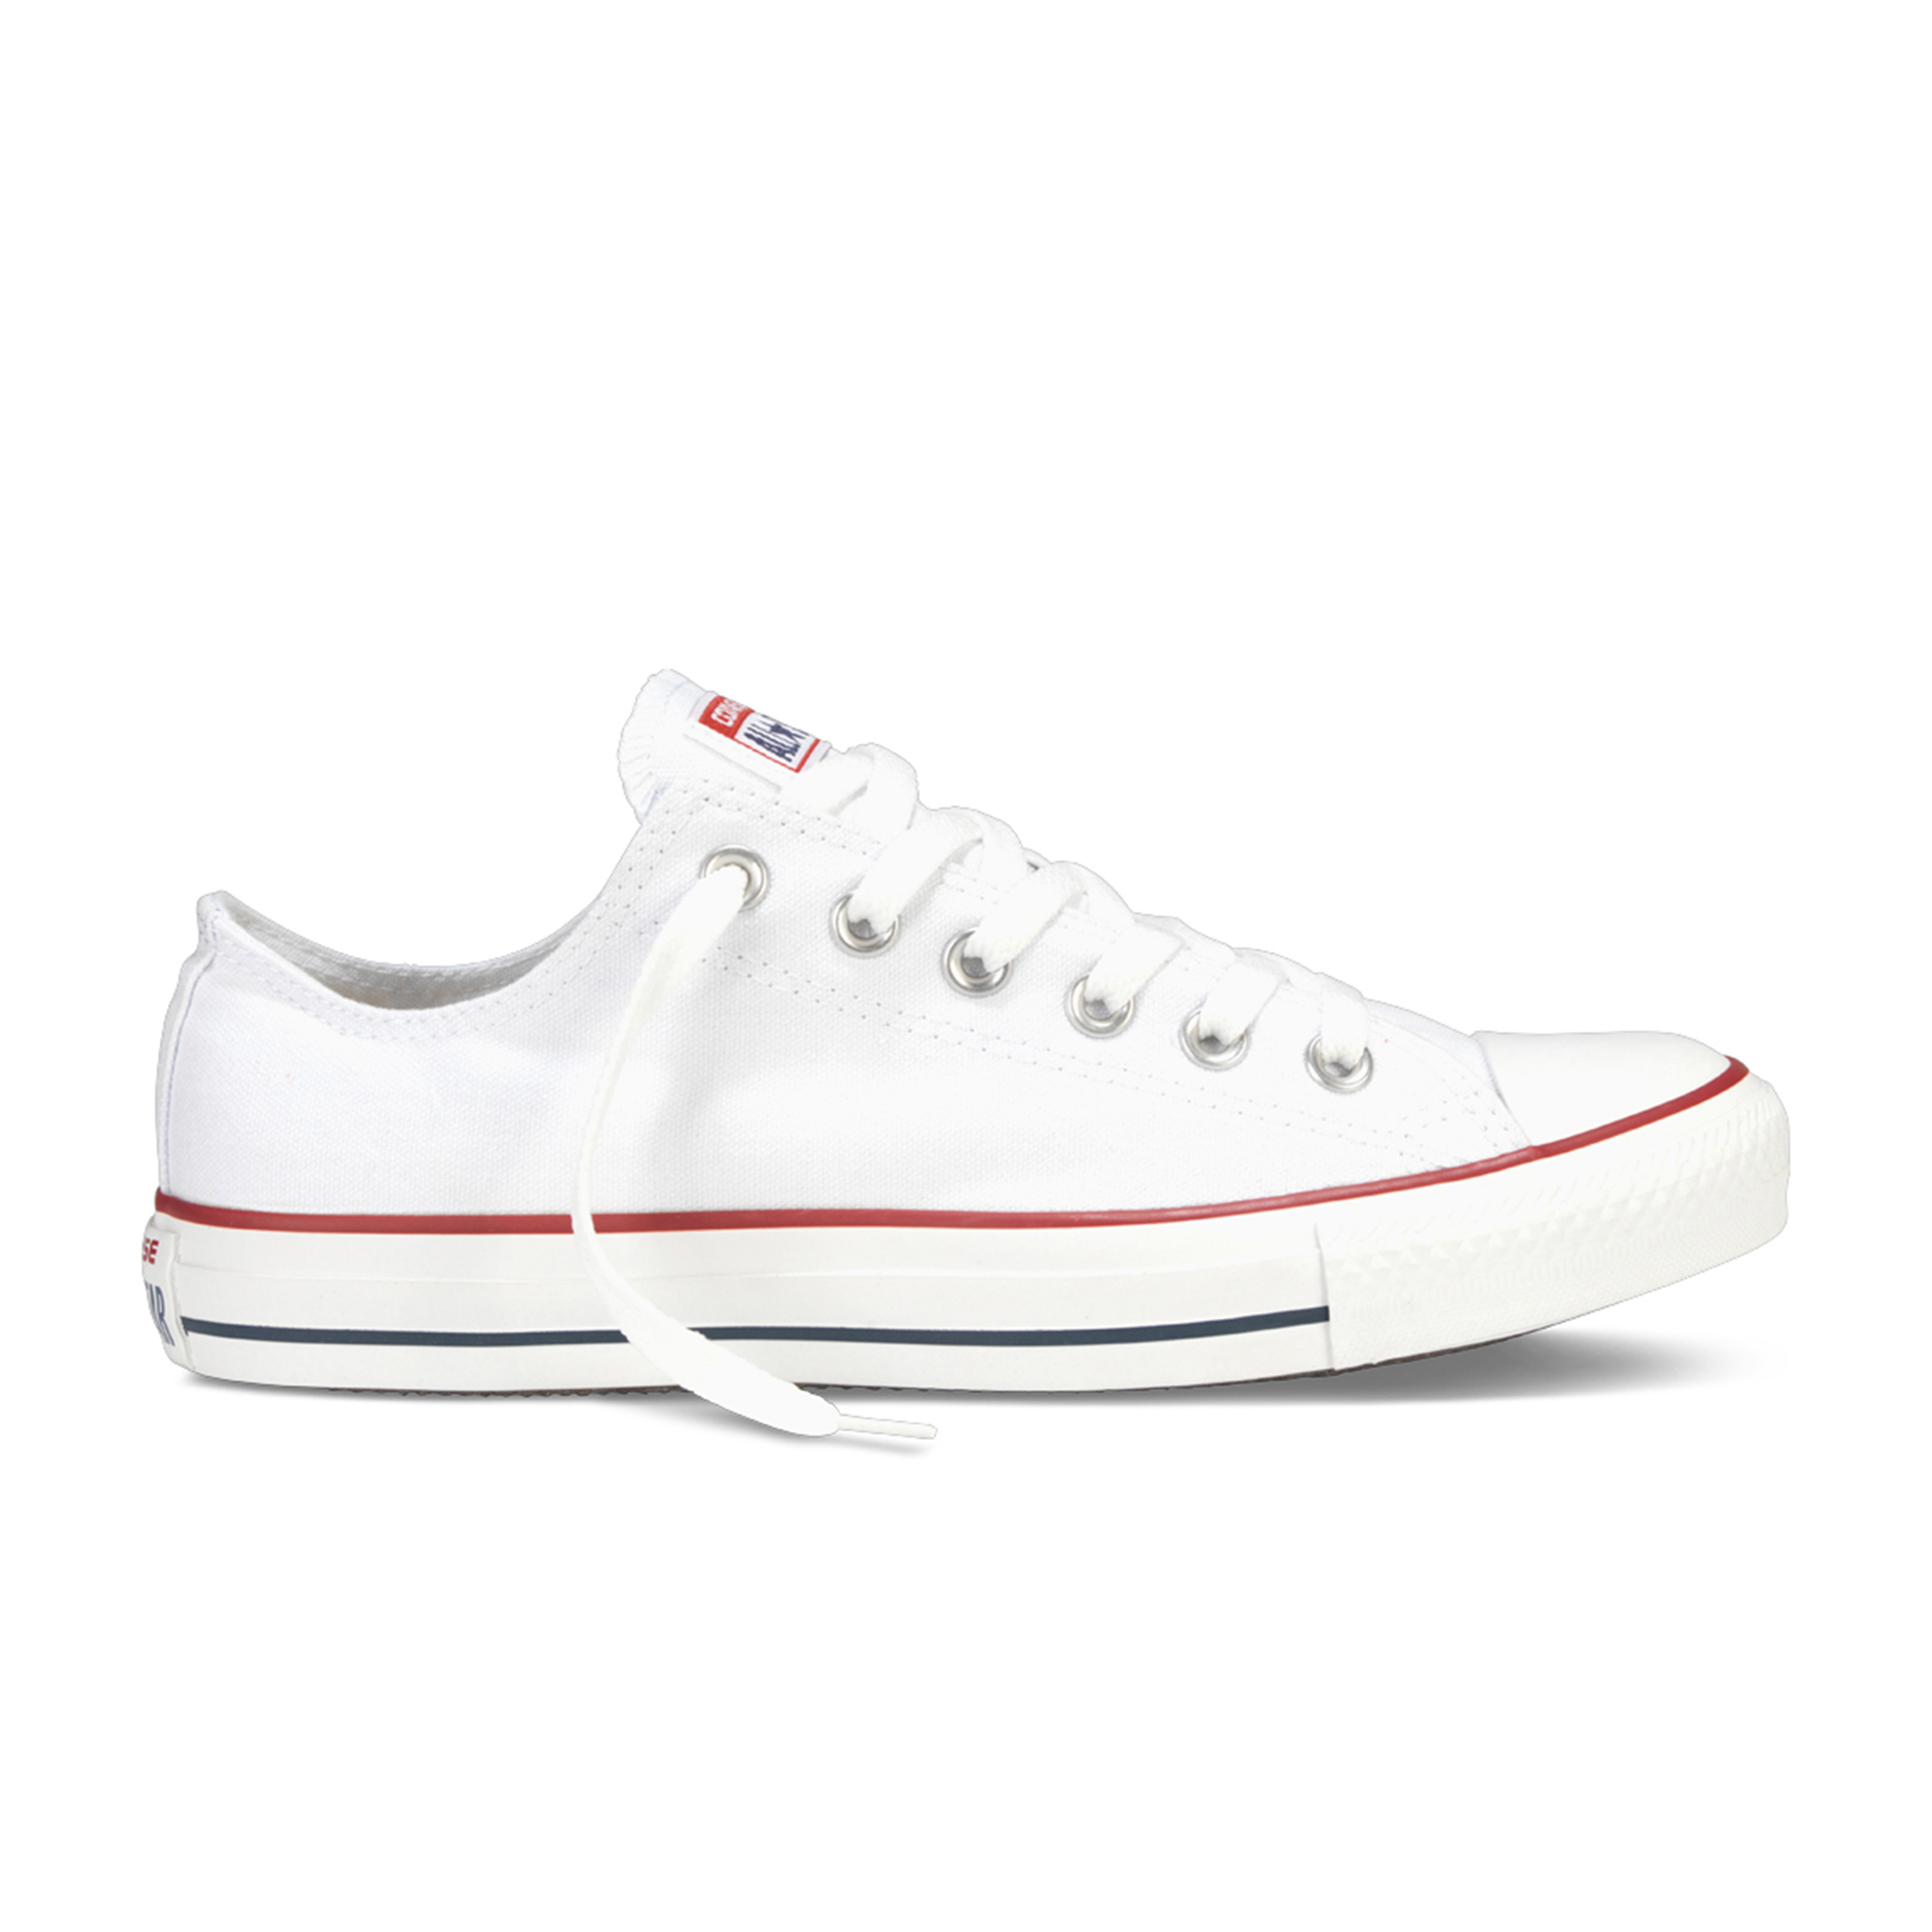 skyld Præfiks motto Teenage Clothing | Clothes for Teens Aged 10-16 CONVERSE | La Redoute